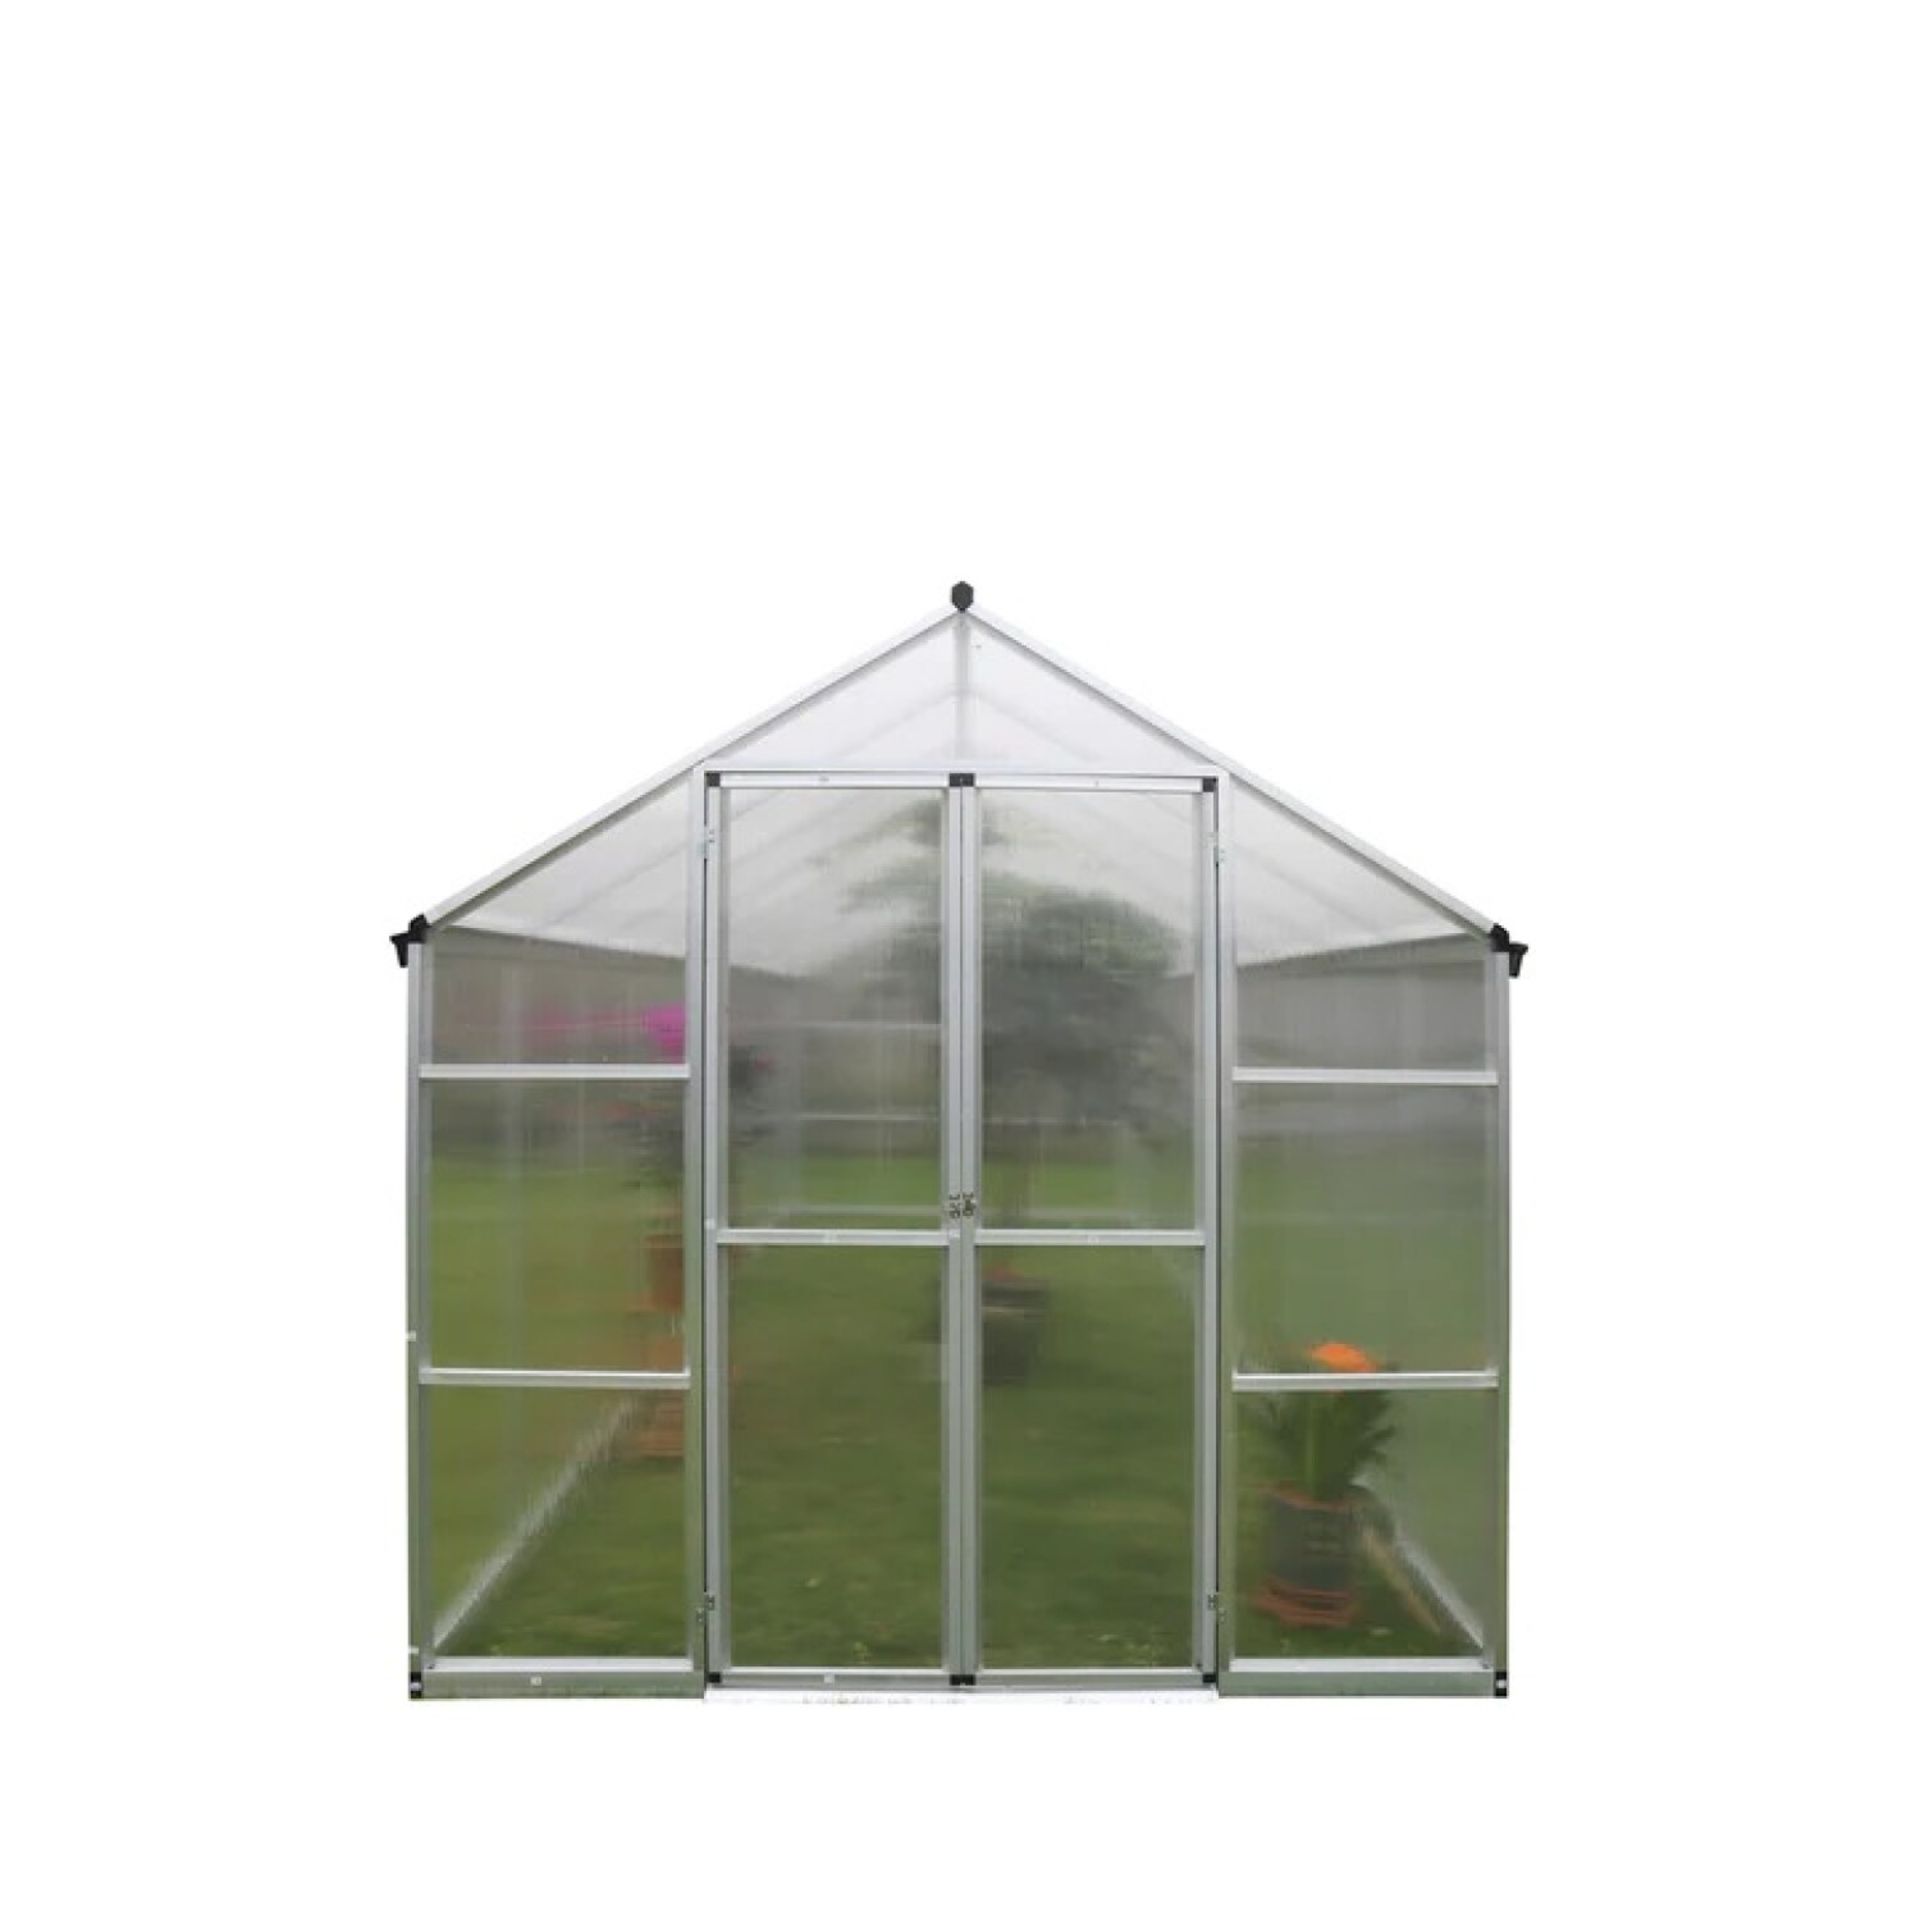 TMG-GH820 TMG INDUSTRIAL 8' X 20' ALUMINUM FRAME GREENHOUSE W/4 MM TWIN WALL POLYCARBONATE PANELS, - Image 4 of 7